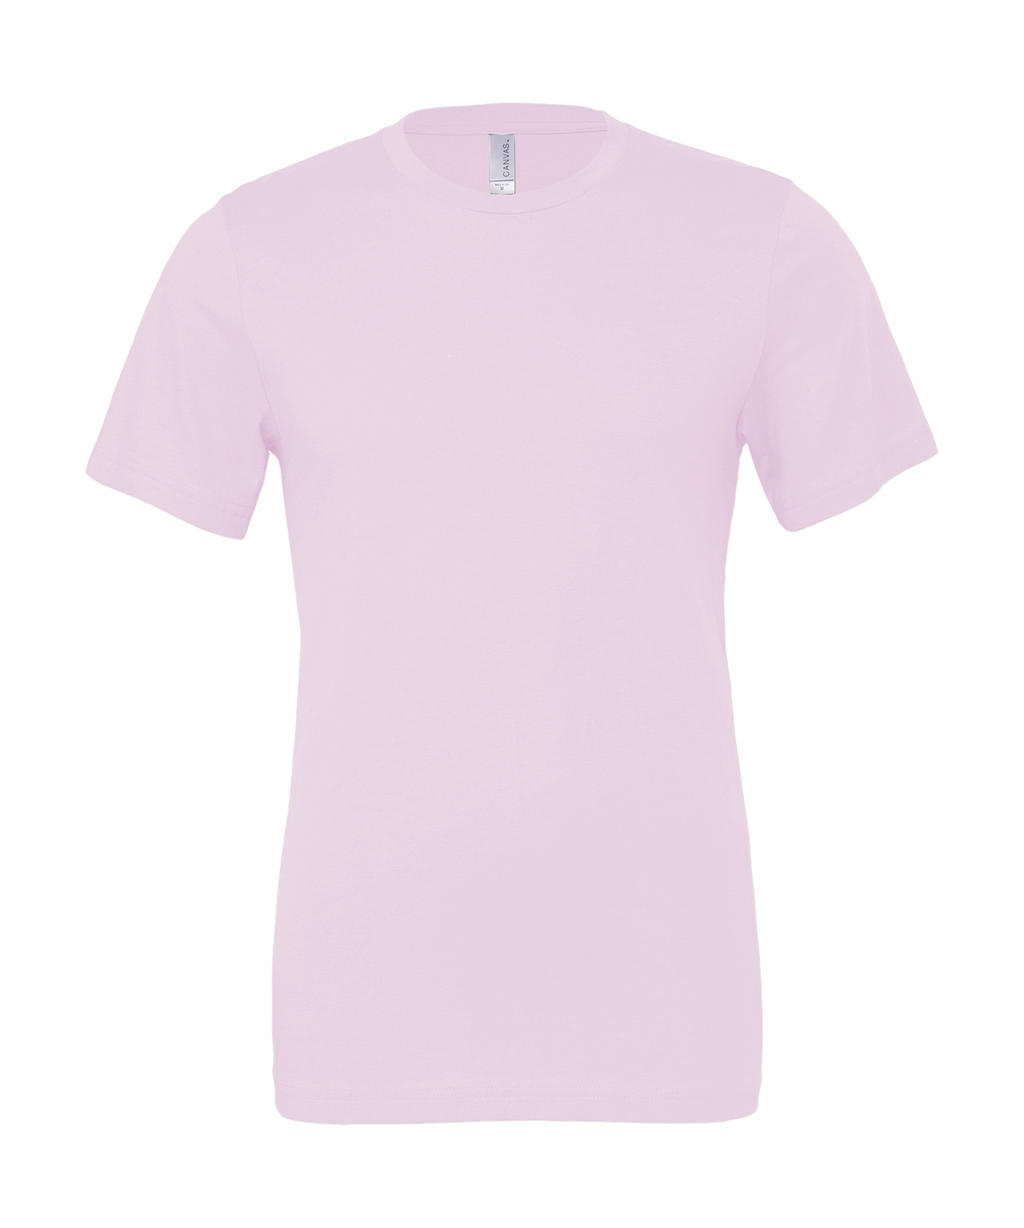  Unisex Jersey Short Sleeve Tee in Farbe Soft Pink